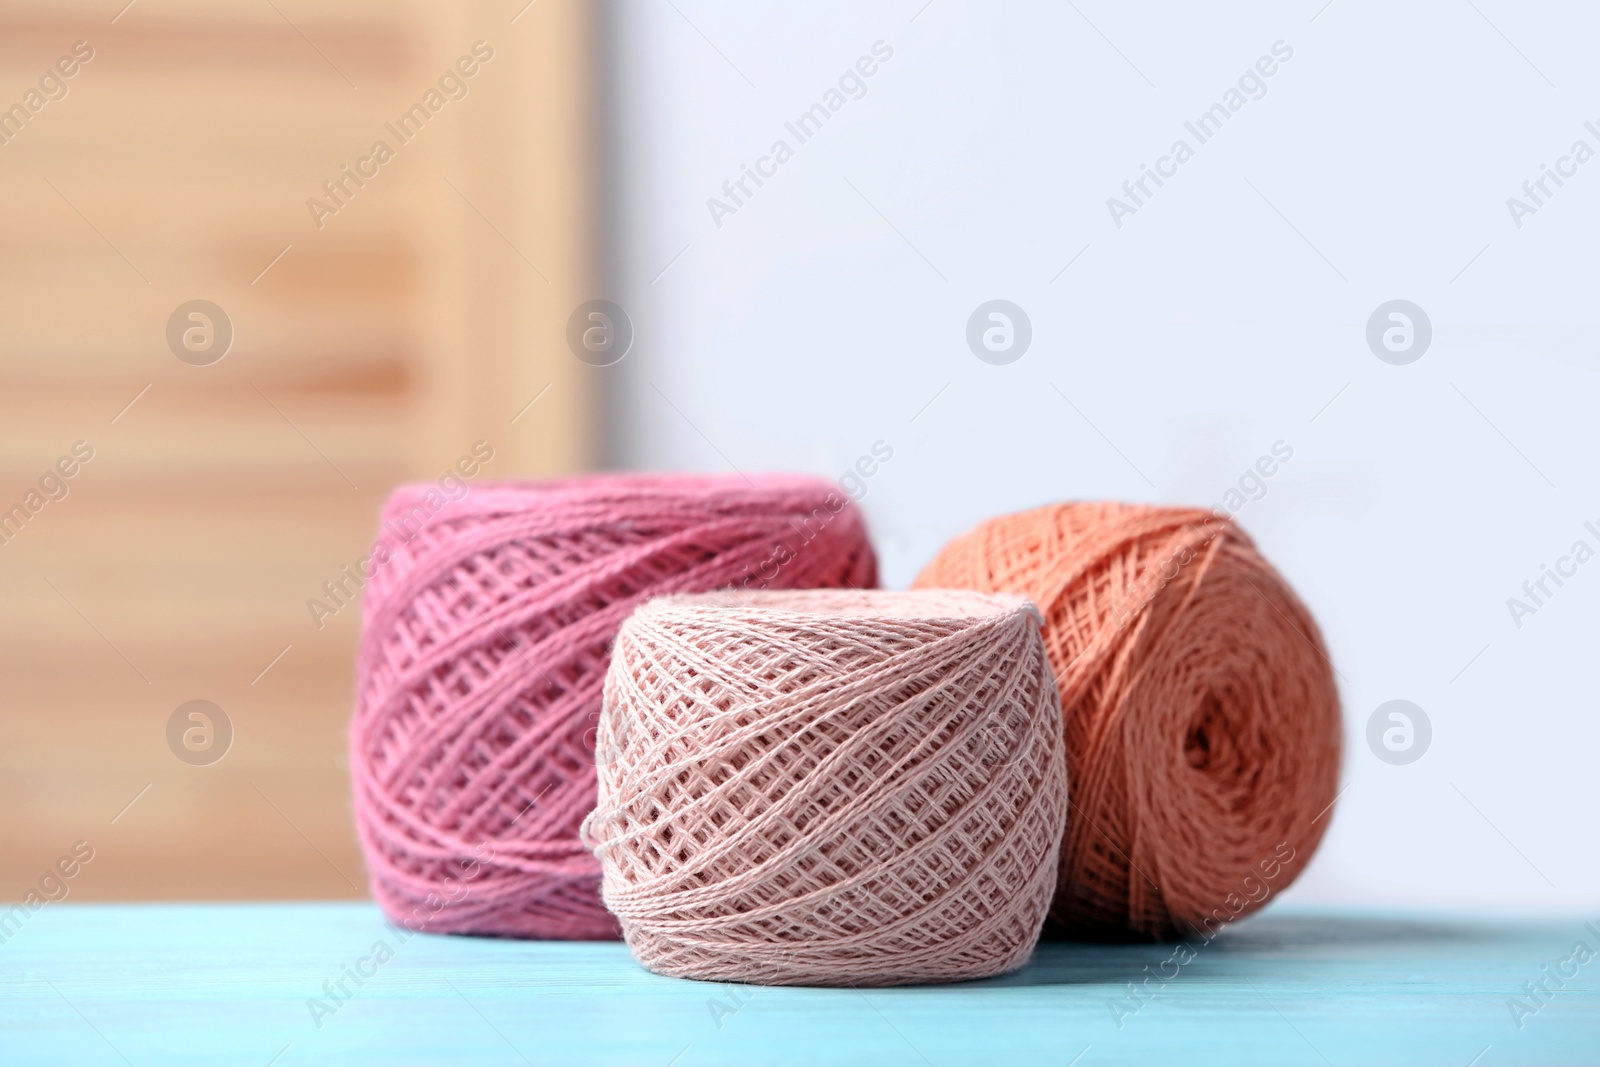 Photo of Colorful clews of threads on table against blurred background